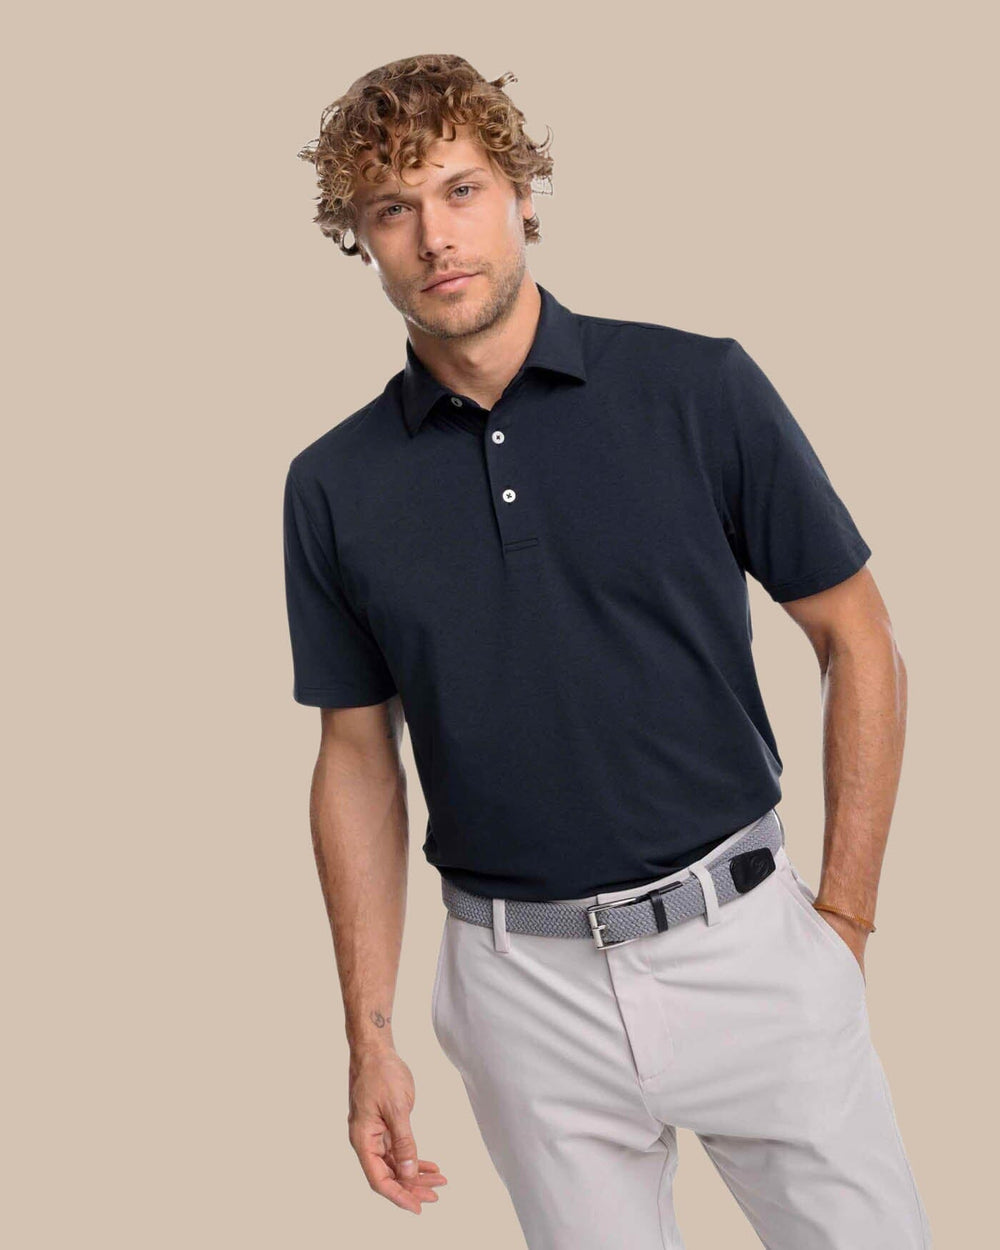 The front view of the Southern Tide brrr-eeze Heather Performance Polo Shirt by Southern Tide - Heather Caviar Black